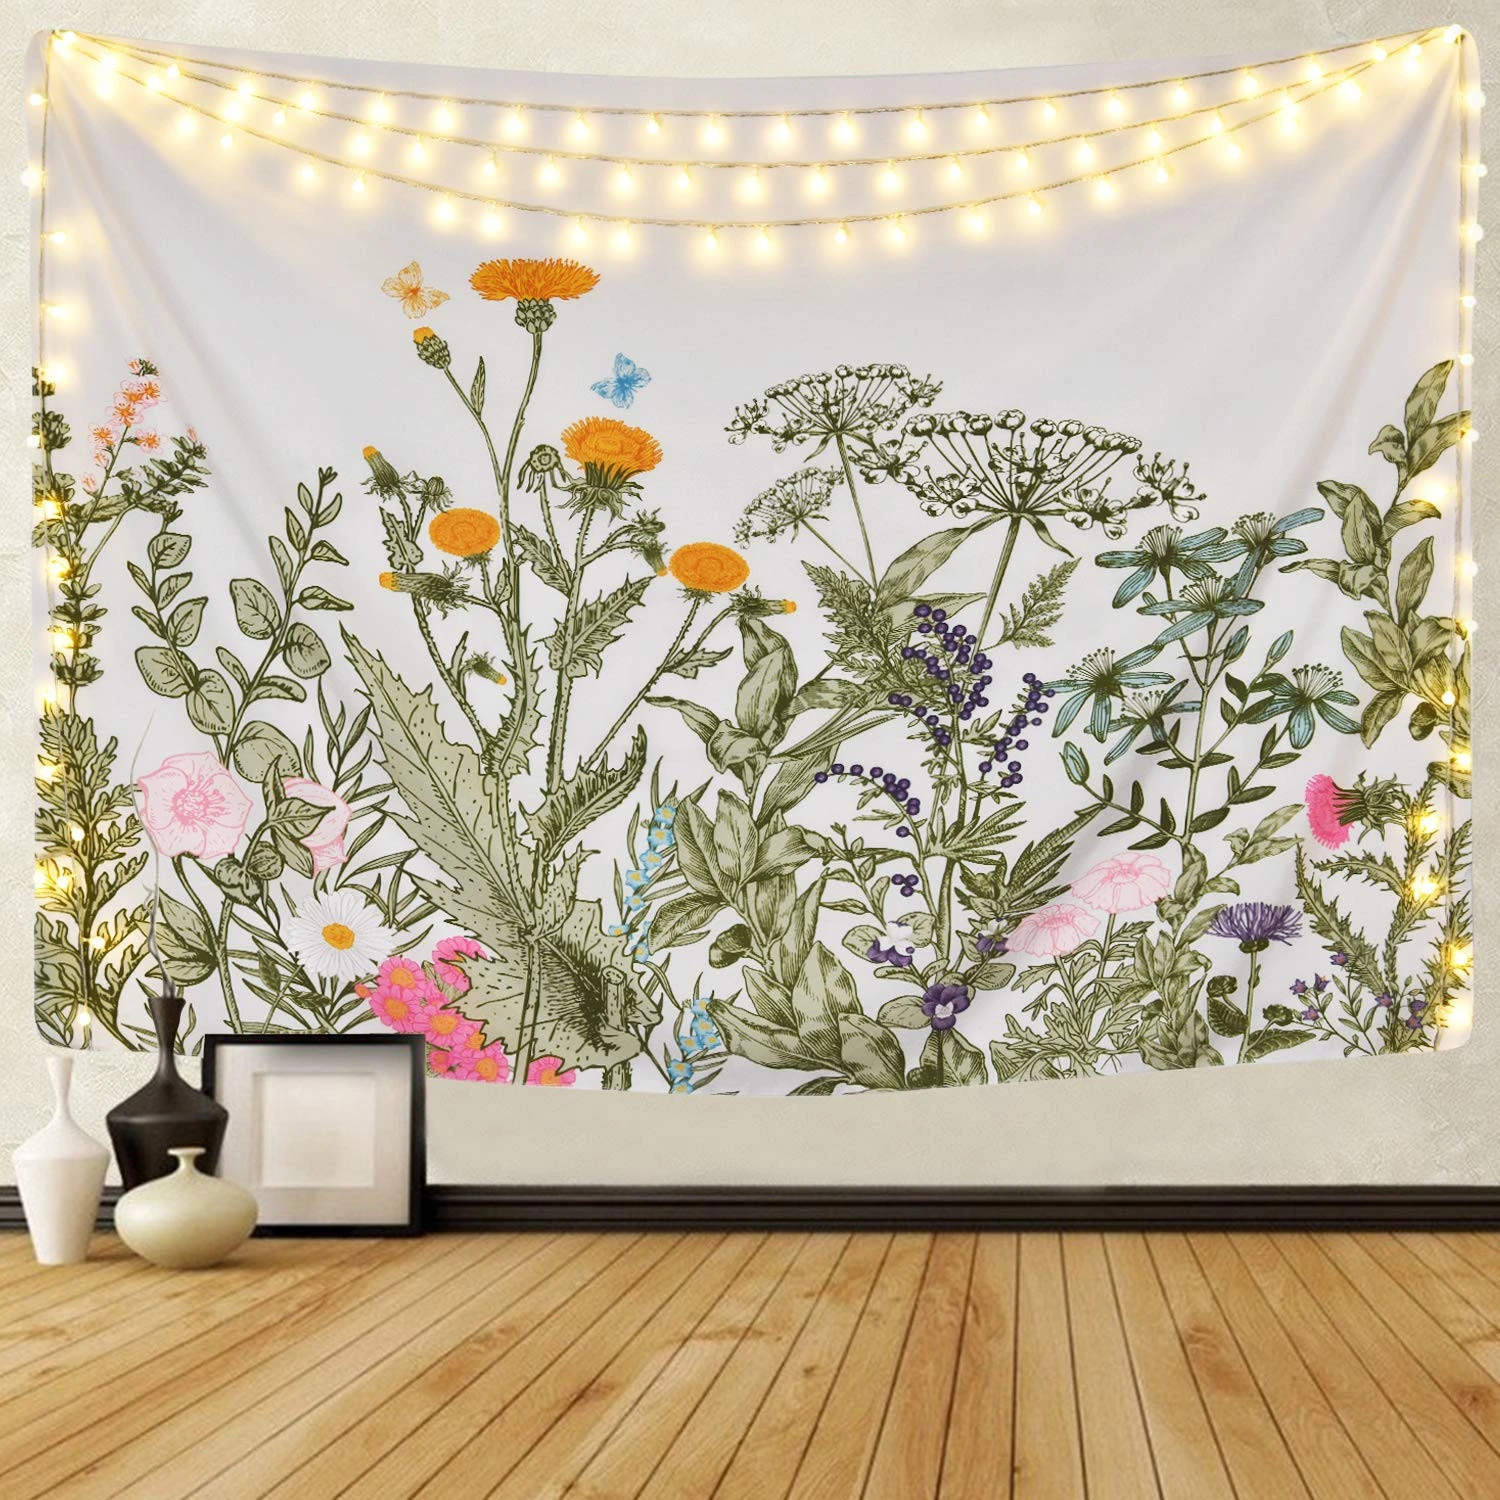 Colorful Floral Plants Tapestry Wild Flowers Tapestry Wall Hanging Nature Scenery Tapestry